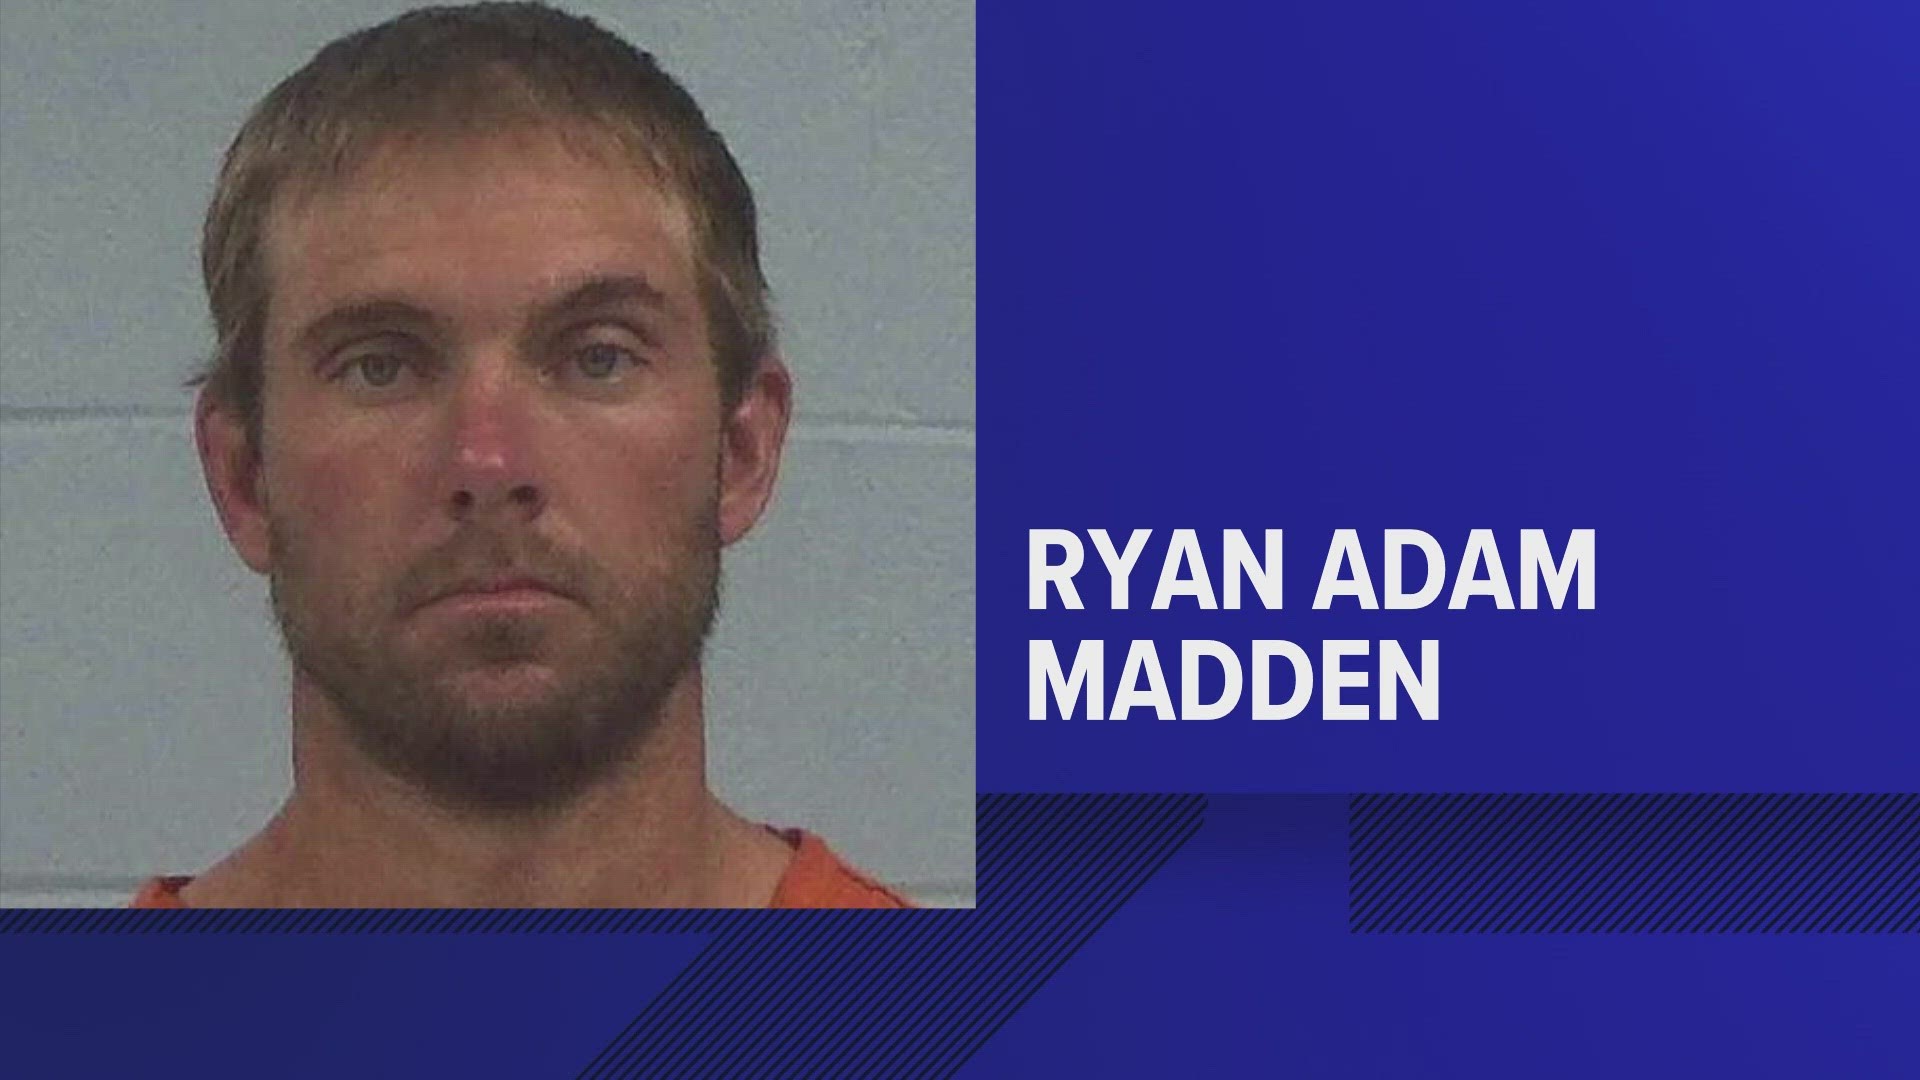 Bell County investigators say Ryan Madden may be tied to the murder of Cody Kinslow, who was killed eight days ago.